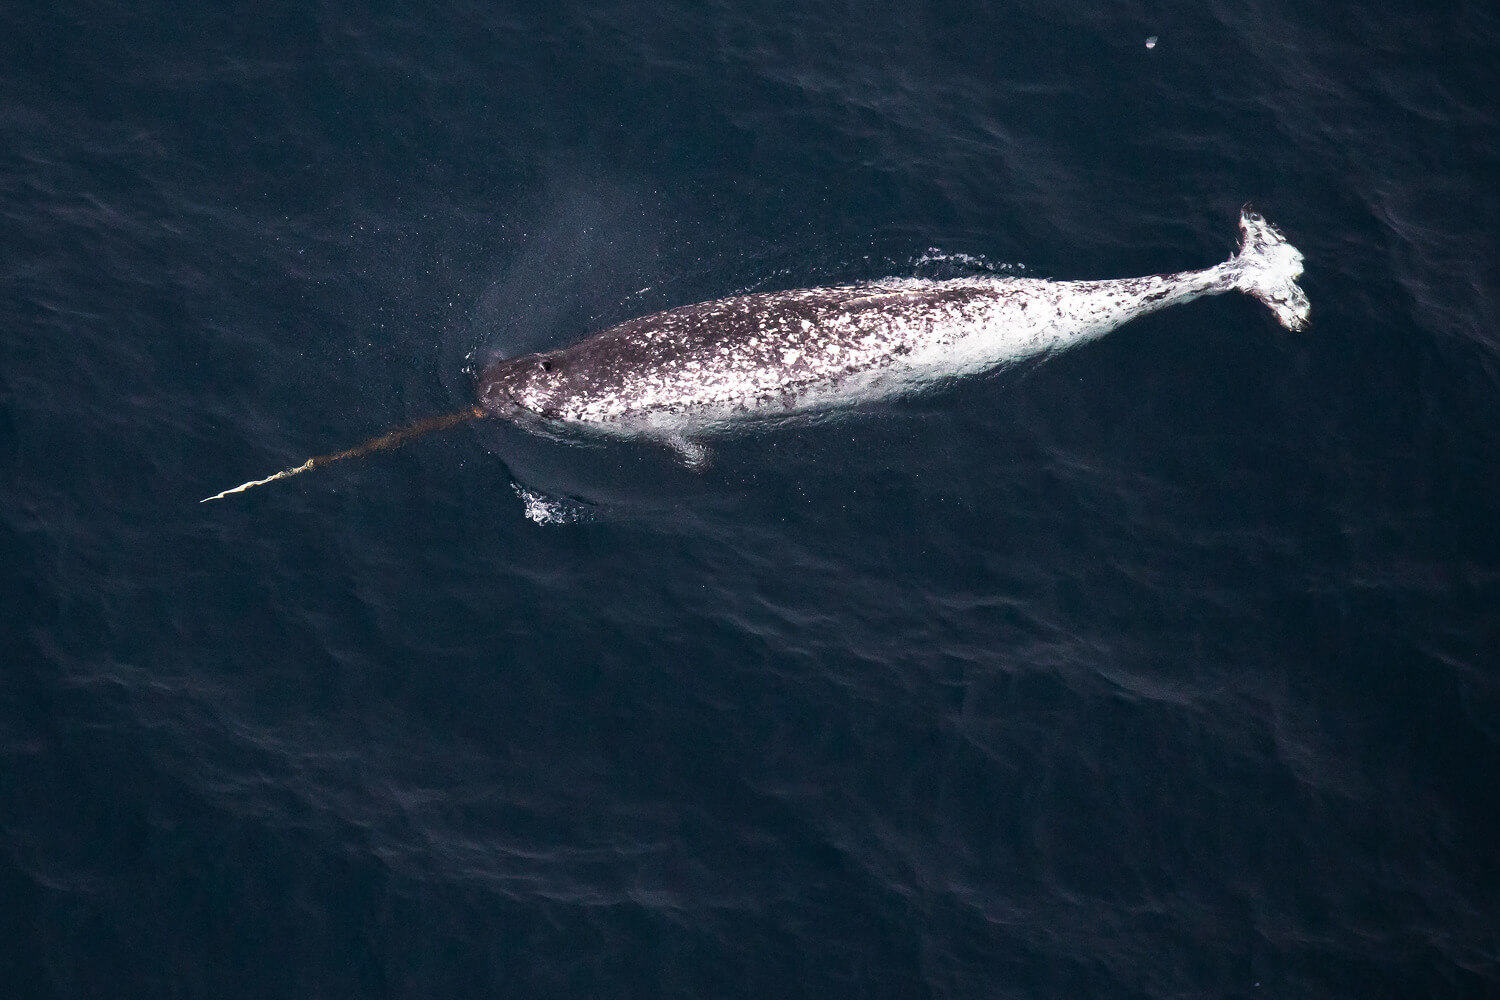 A narwhal.